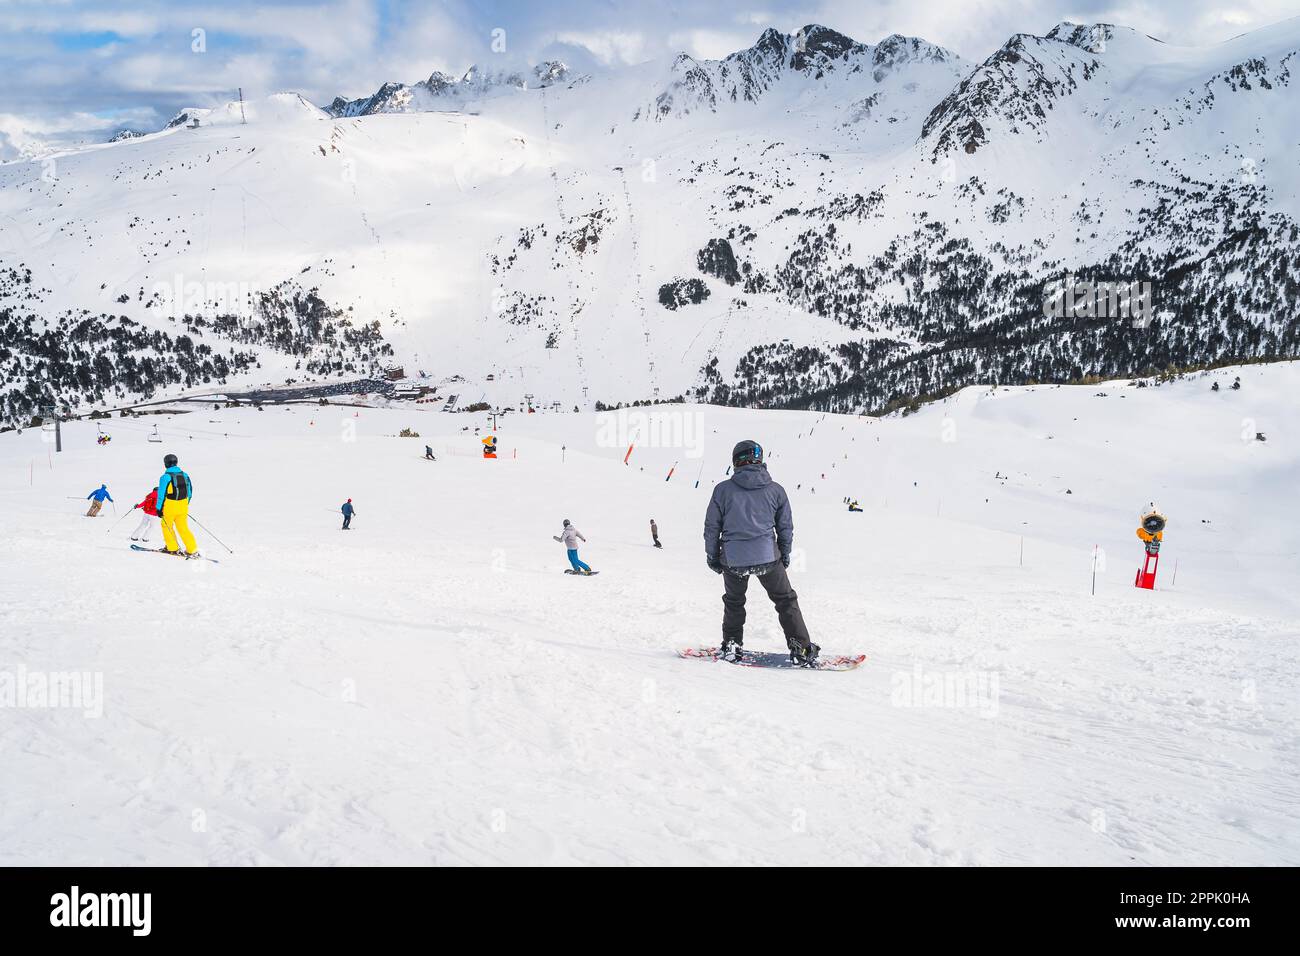 Snowboarders and skiers riding down the mountain, Andorra, Pyrenees Stock Photo